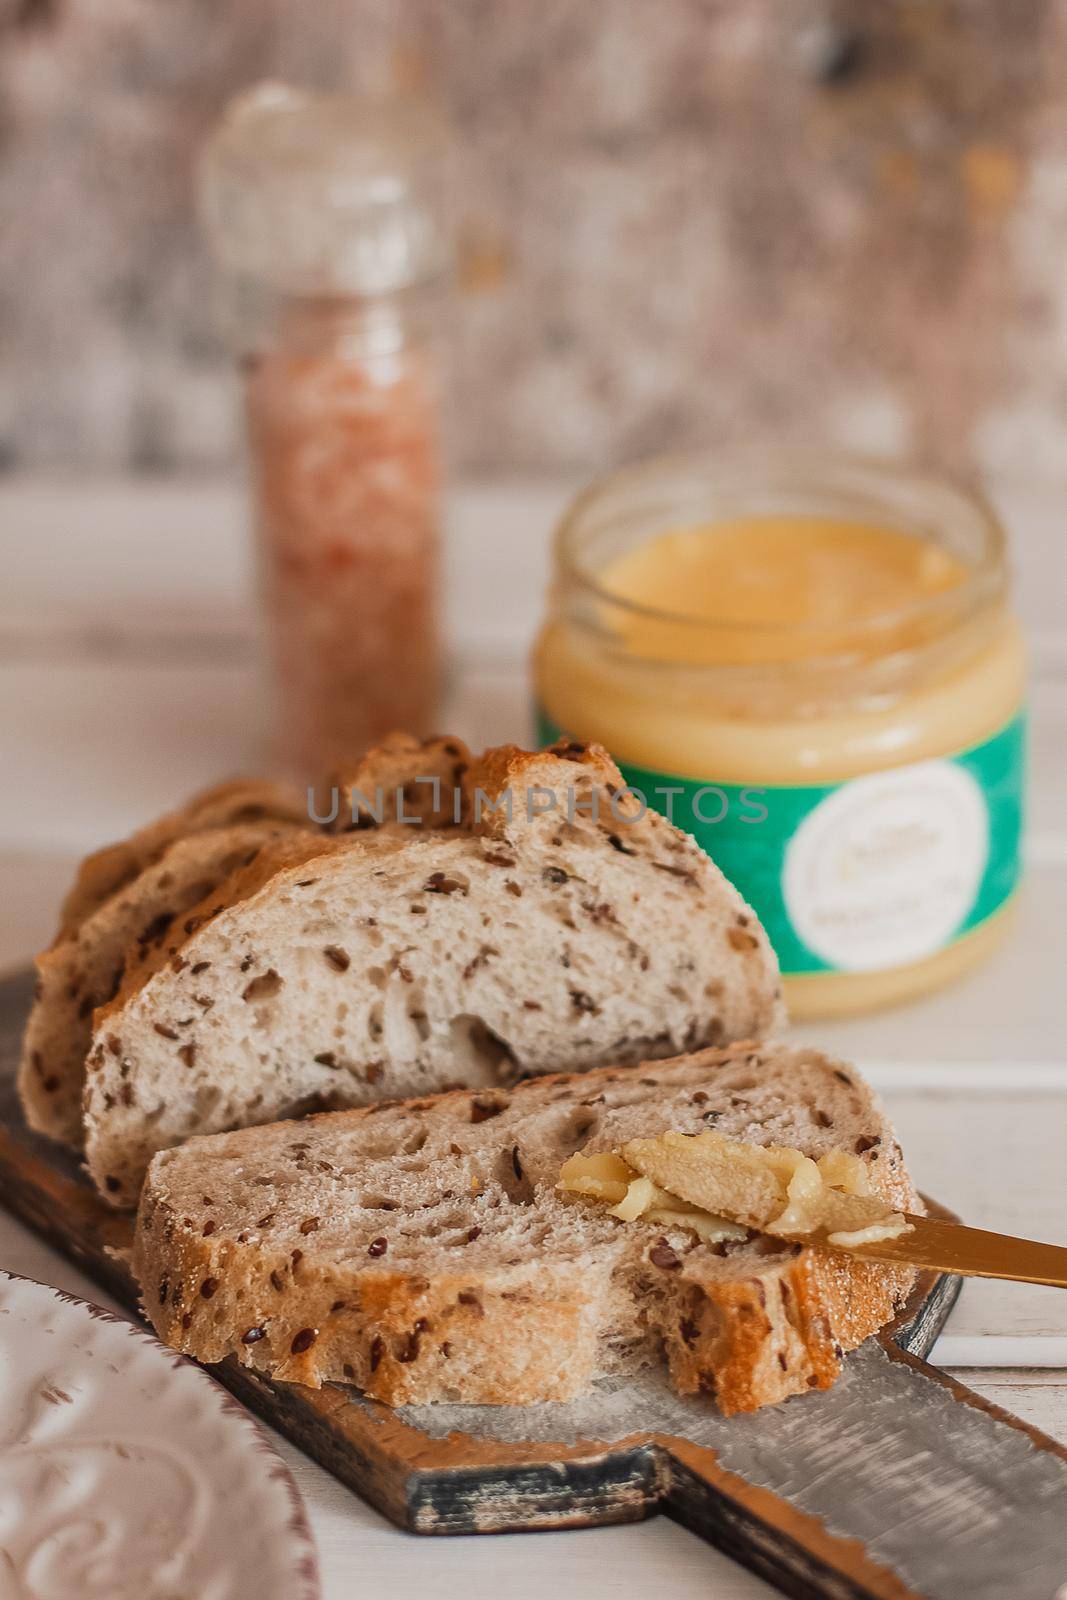 Ghee butter in glass jar and sliced bread on table. Healthy eating, breakfast.